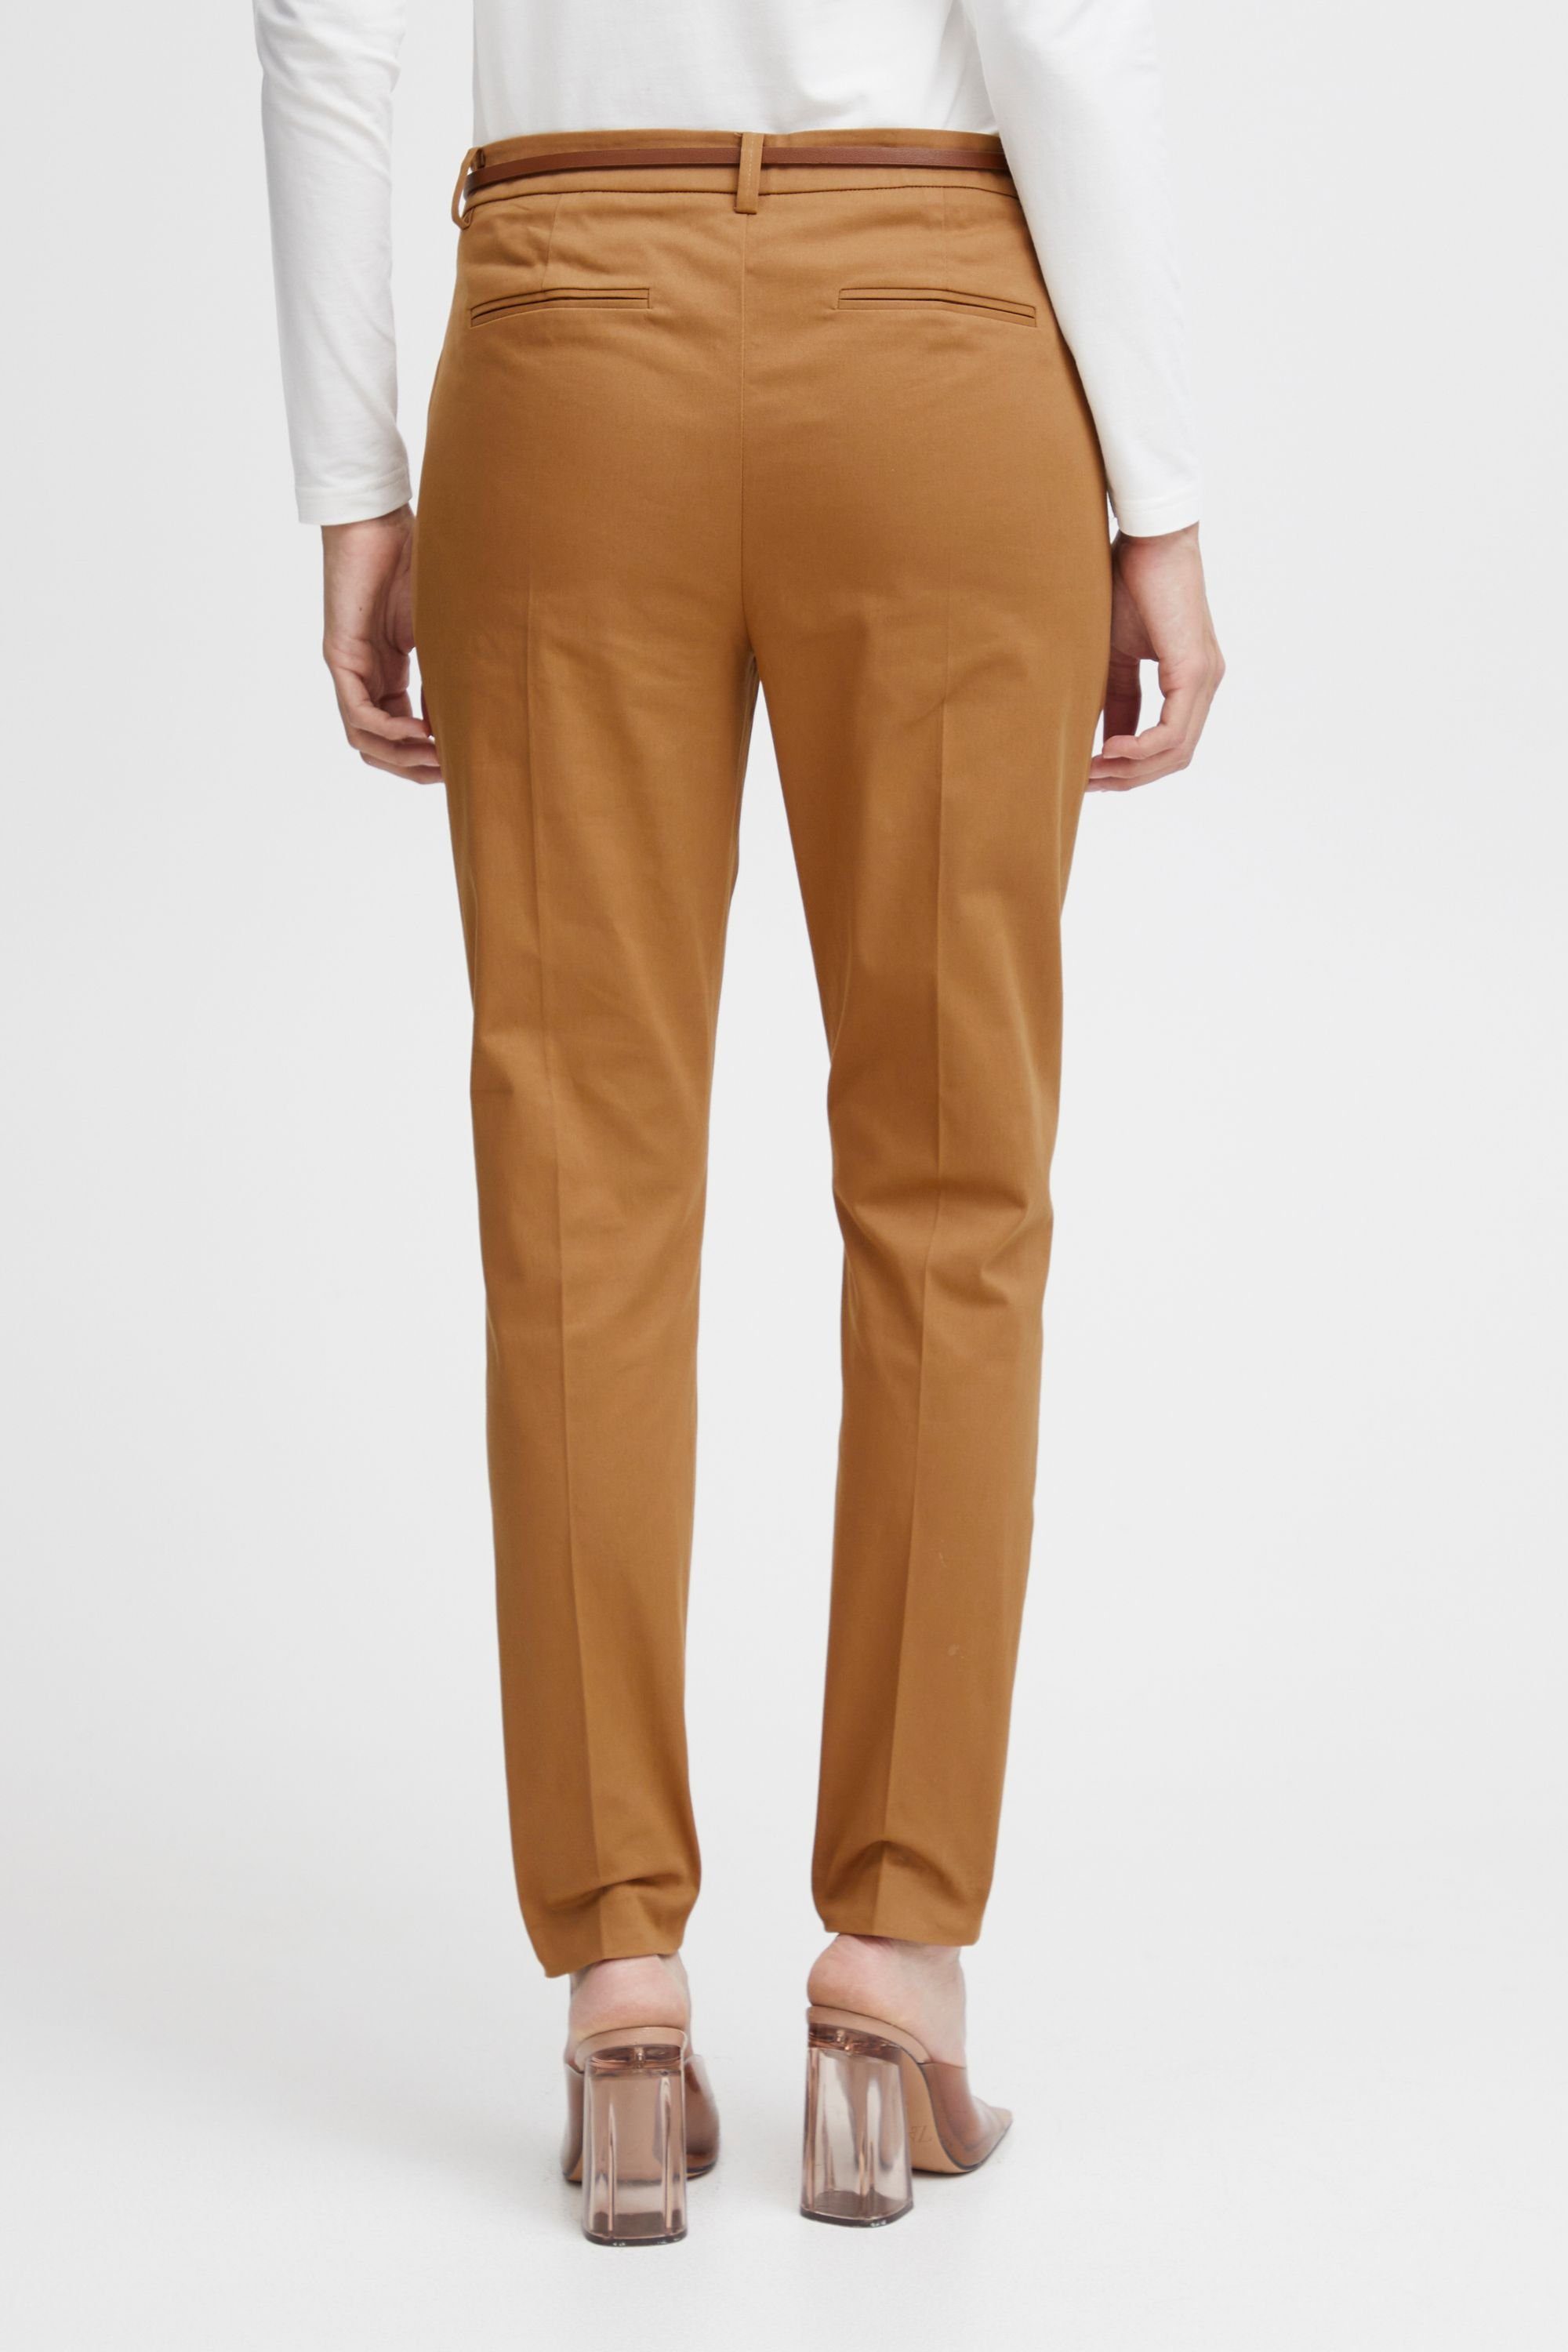 Chinohose Coconut im 20803473 BYDays Chinostyle Toasted b.young Lange Hose 2 cigaret (181029) pants - coolen